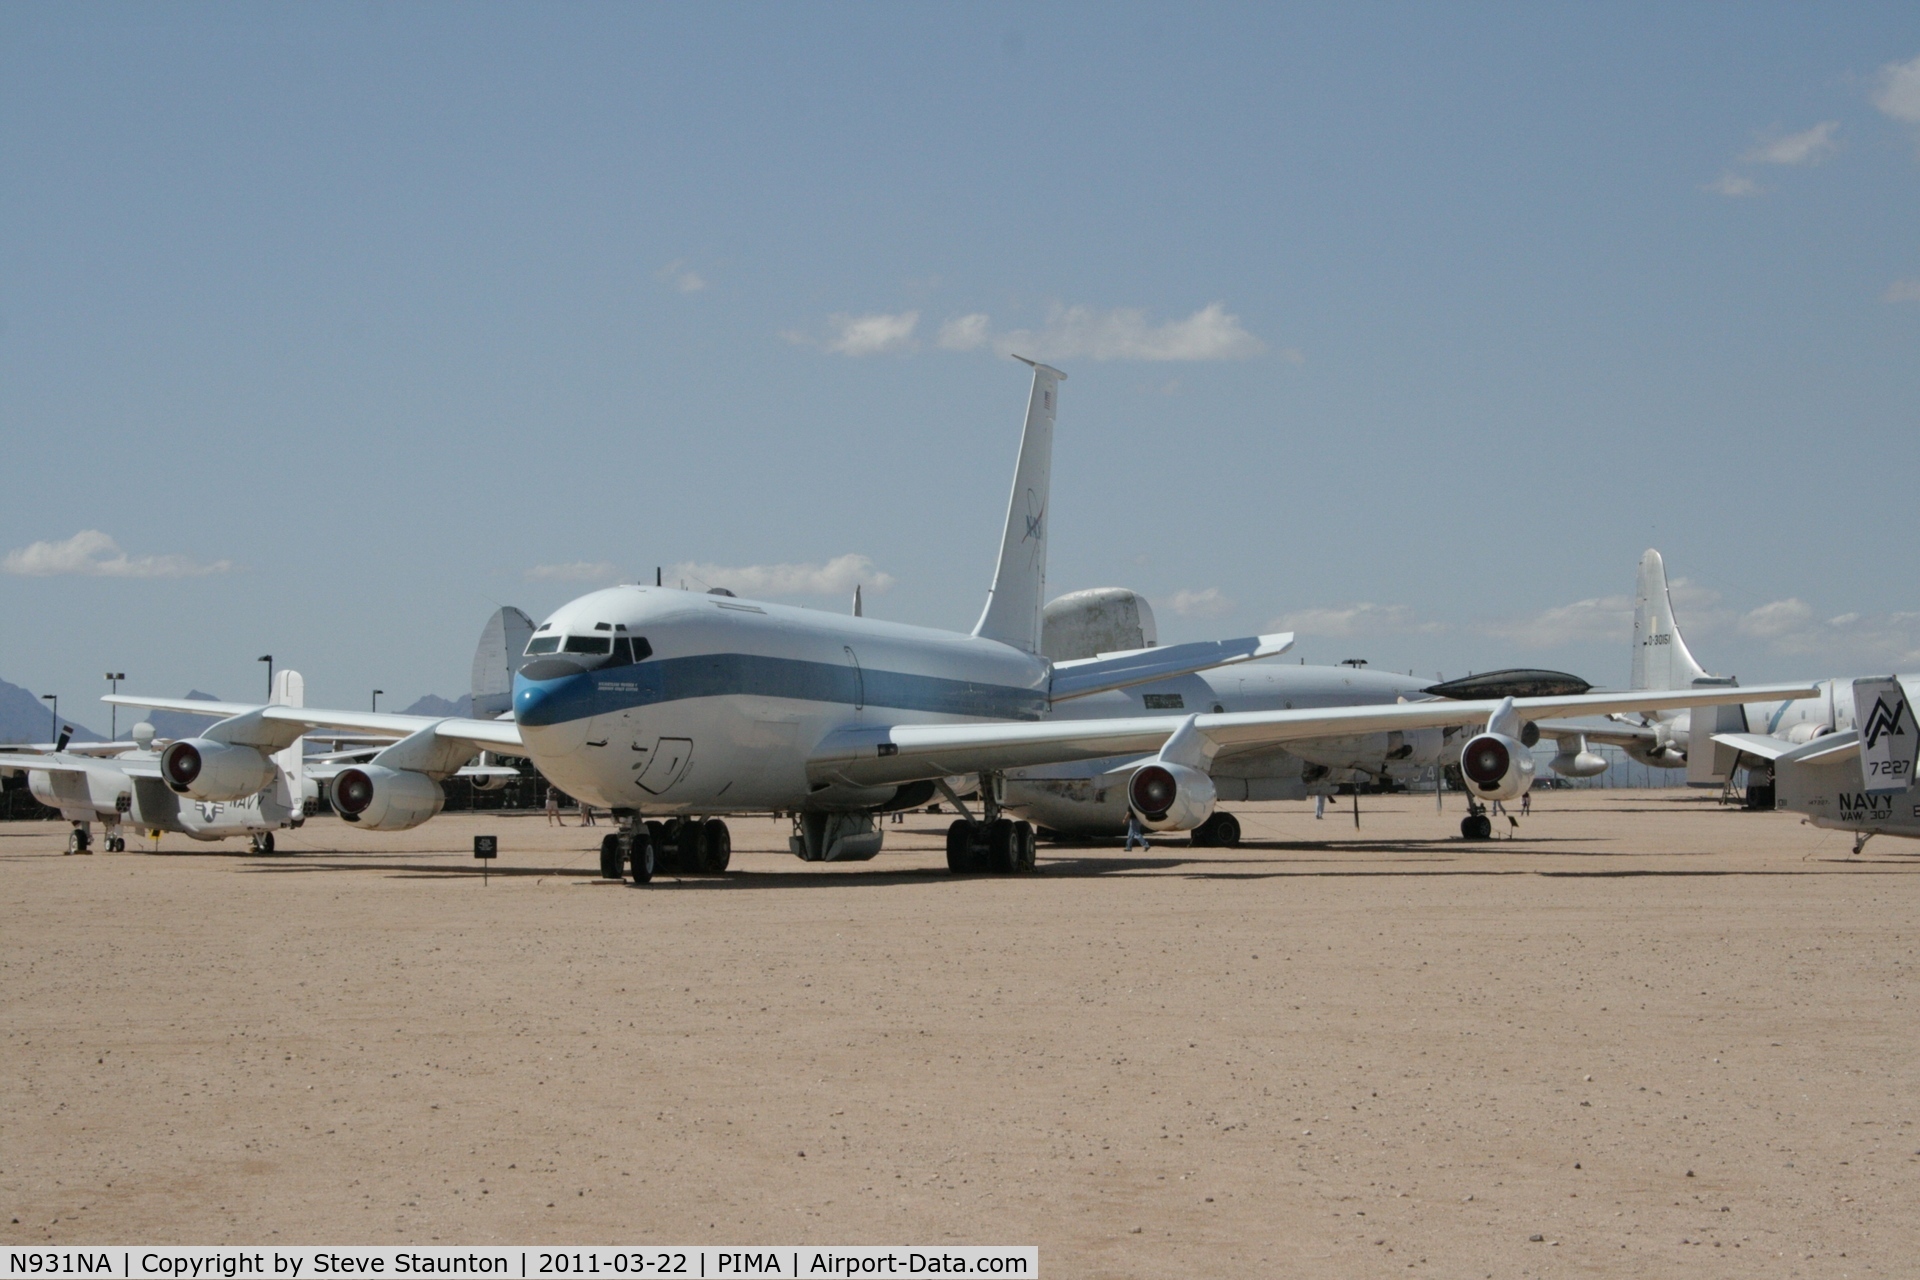 N931NA, 1963 Boeing KC-135A Stratotanker C/N 18615, Taken at Pima Air and Space Museum, in March 2011 whilst on an Aeroprint Aviation tour